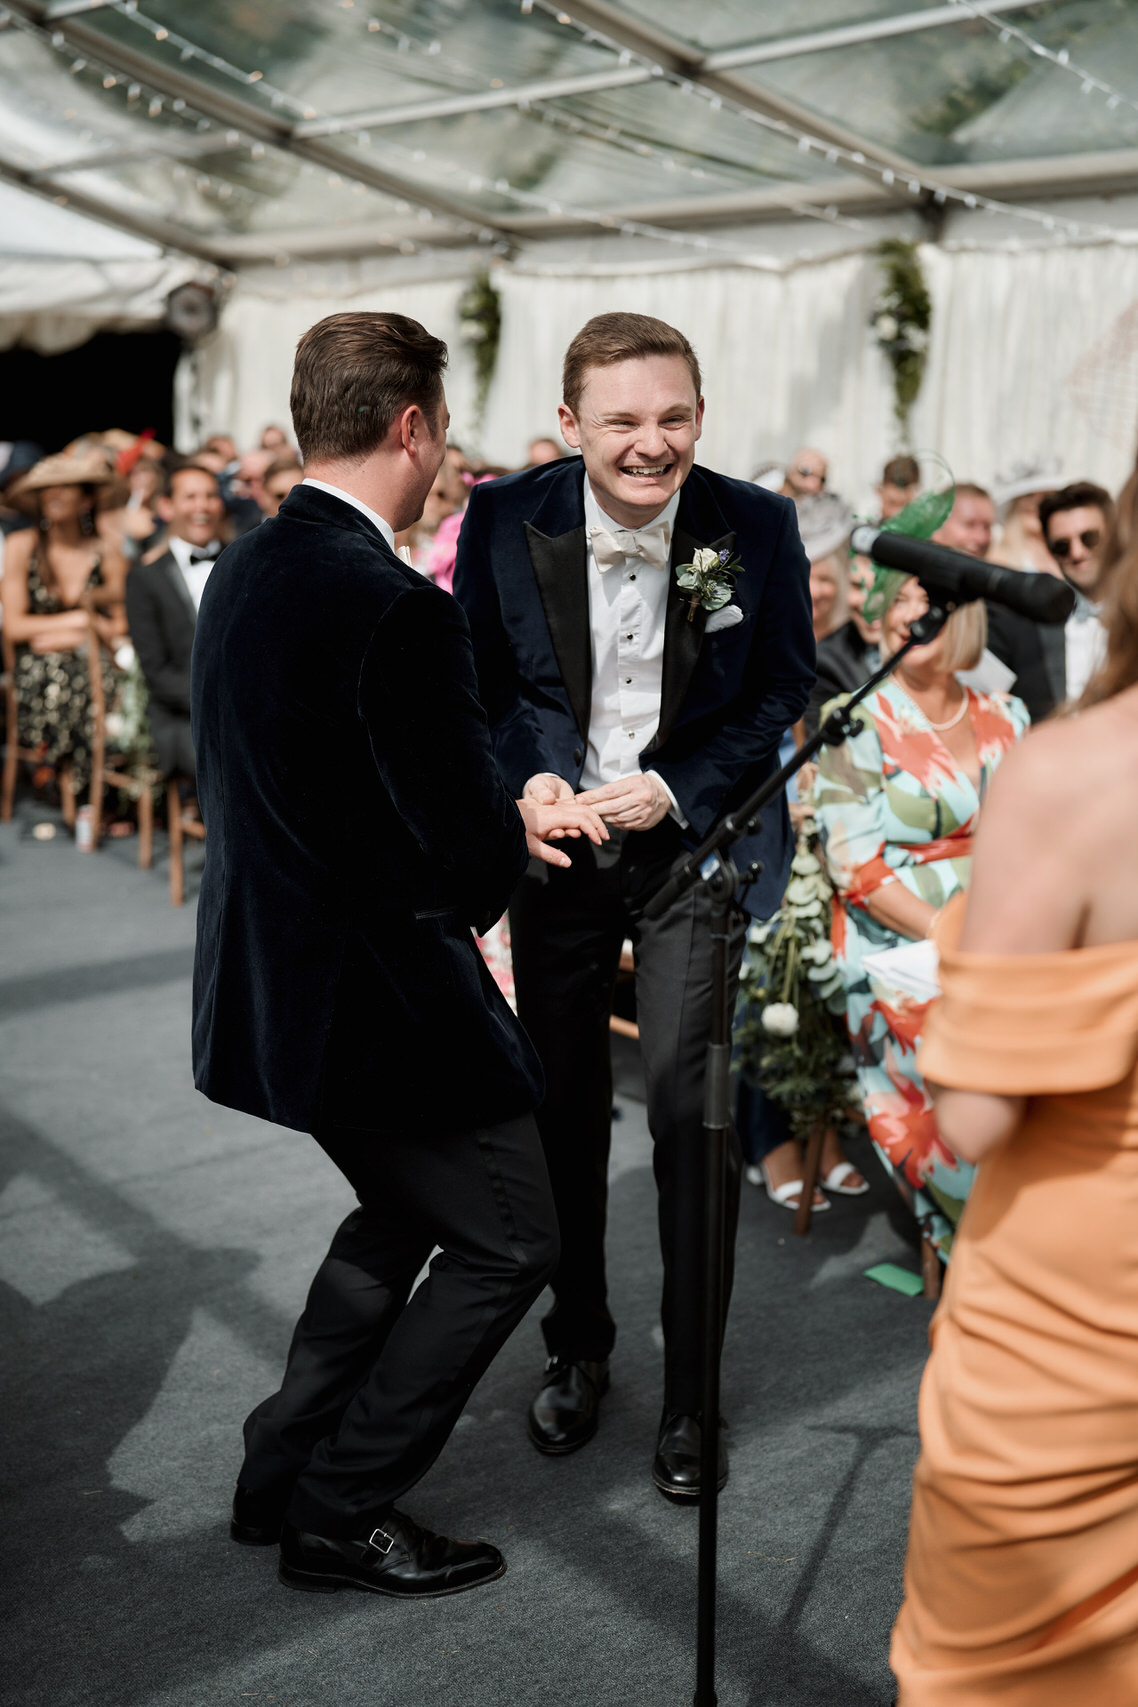 Two guys in tuxedos at a wedding.